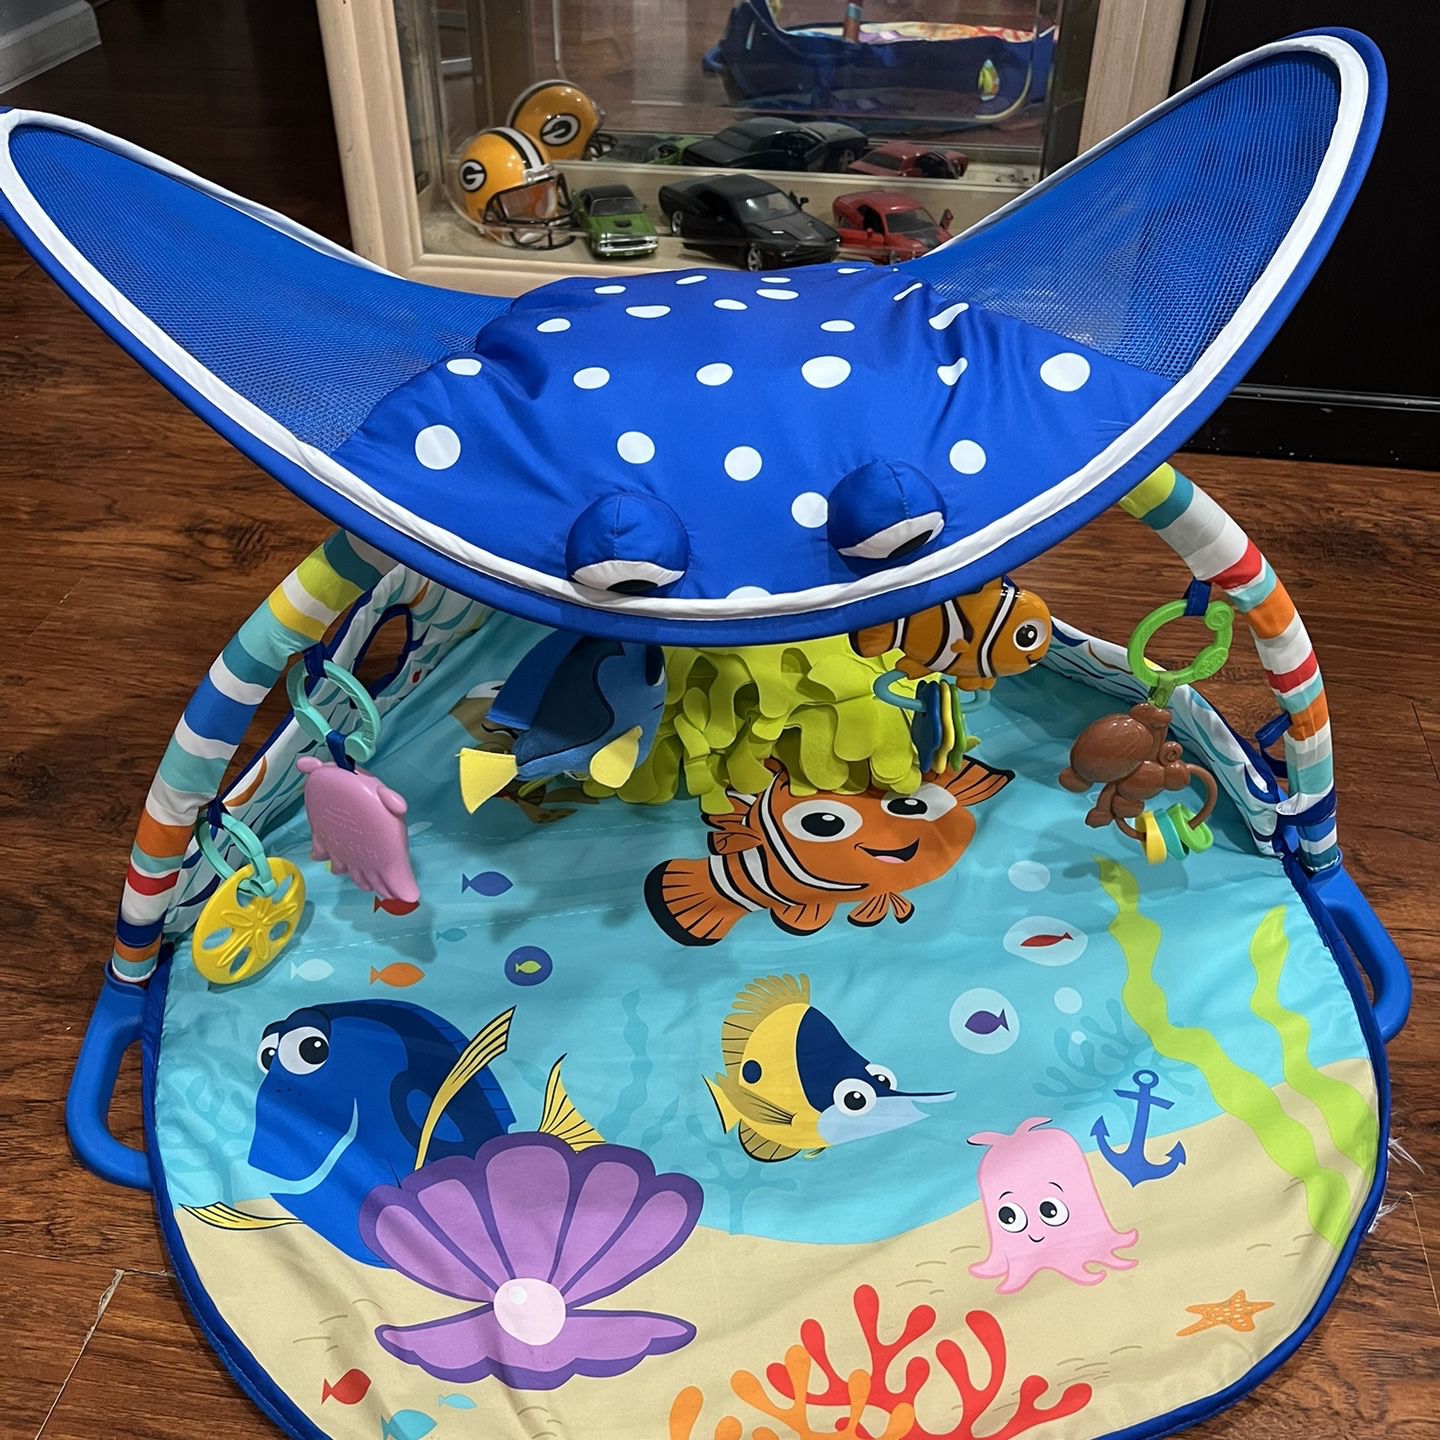 Baby Nemo & Finding Activity - Disney OfferUp Lights Ray Mr. in Music Gym Sale CA for Glendale, Play Ocean